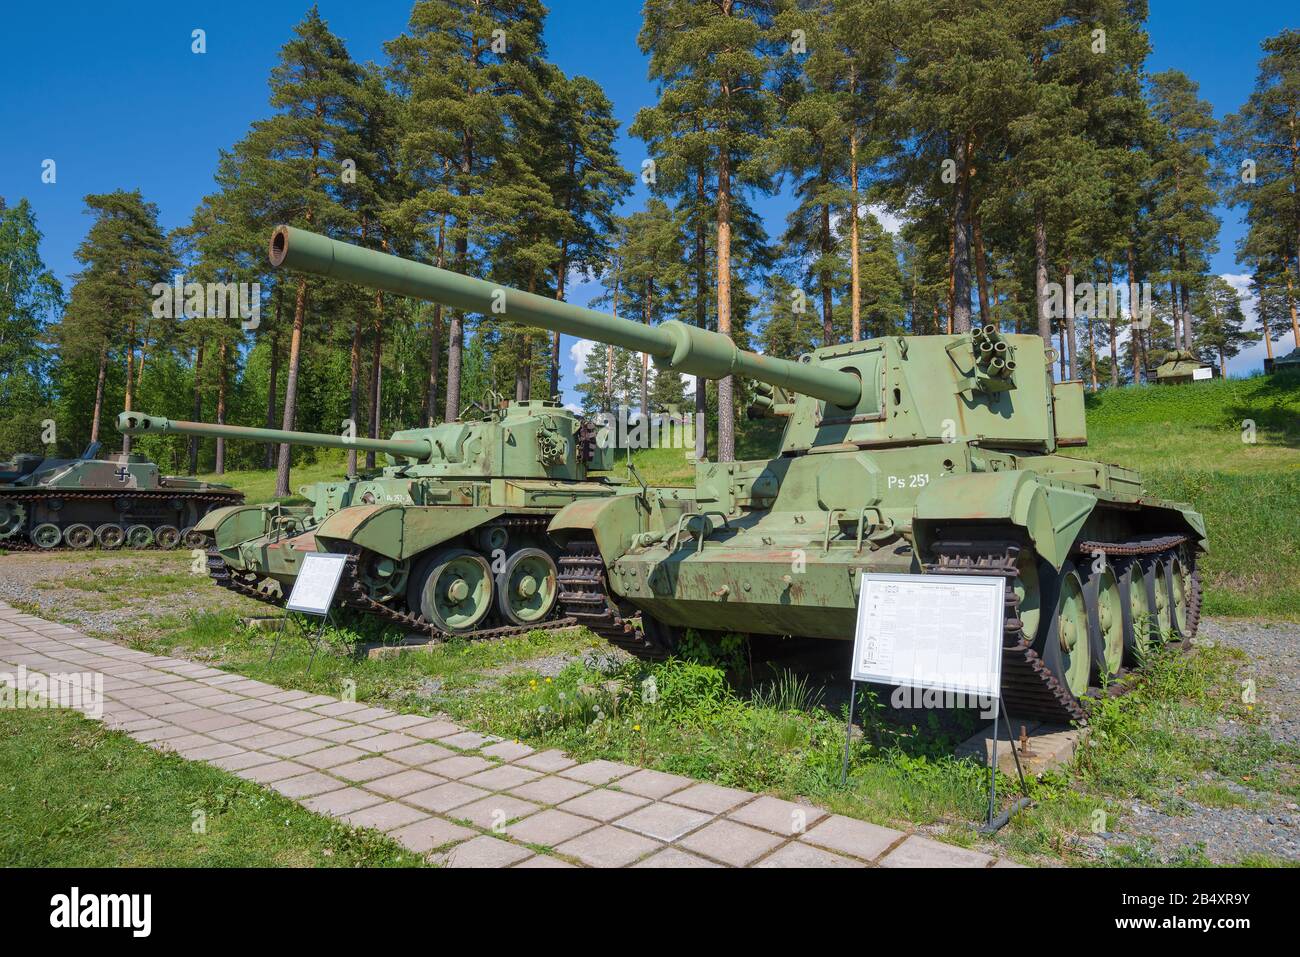 PAROLA, FINLAND - JUNE 10, 2017: Sunny June day on the Museum of Armored Vehicles Stock Photo